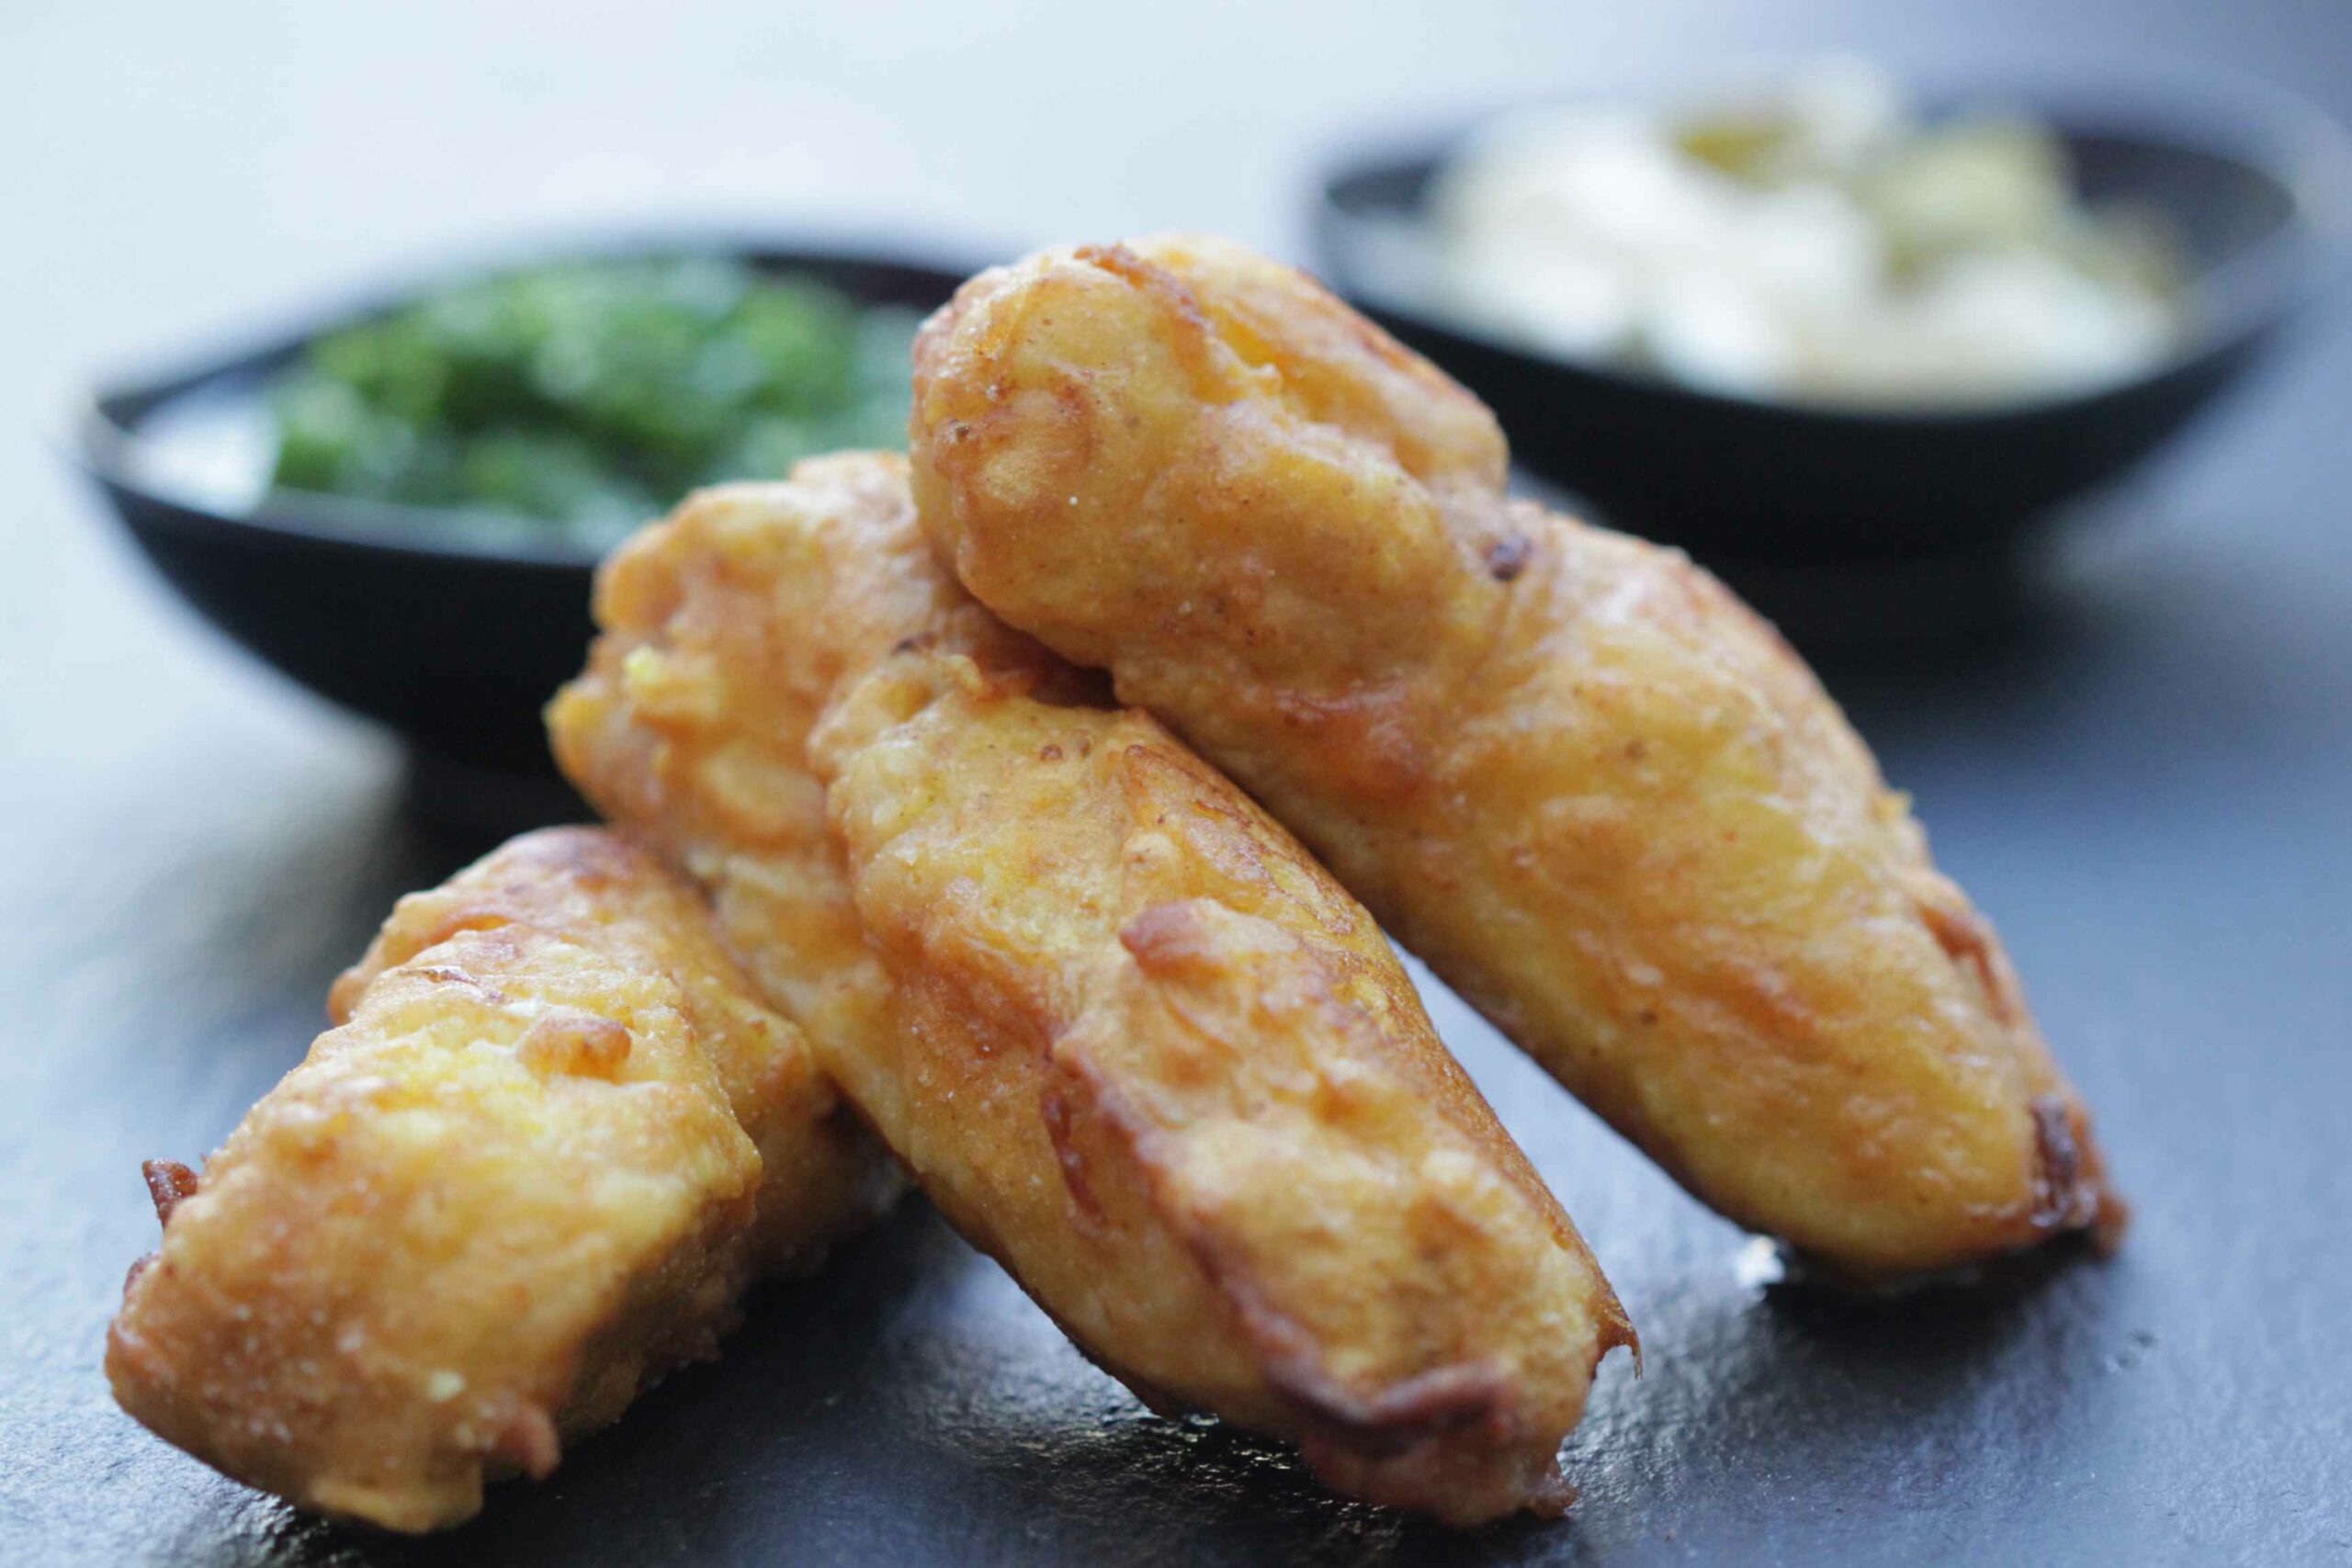 The fish fingers are made with Indian spices that enhance their flavour profile